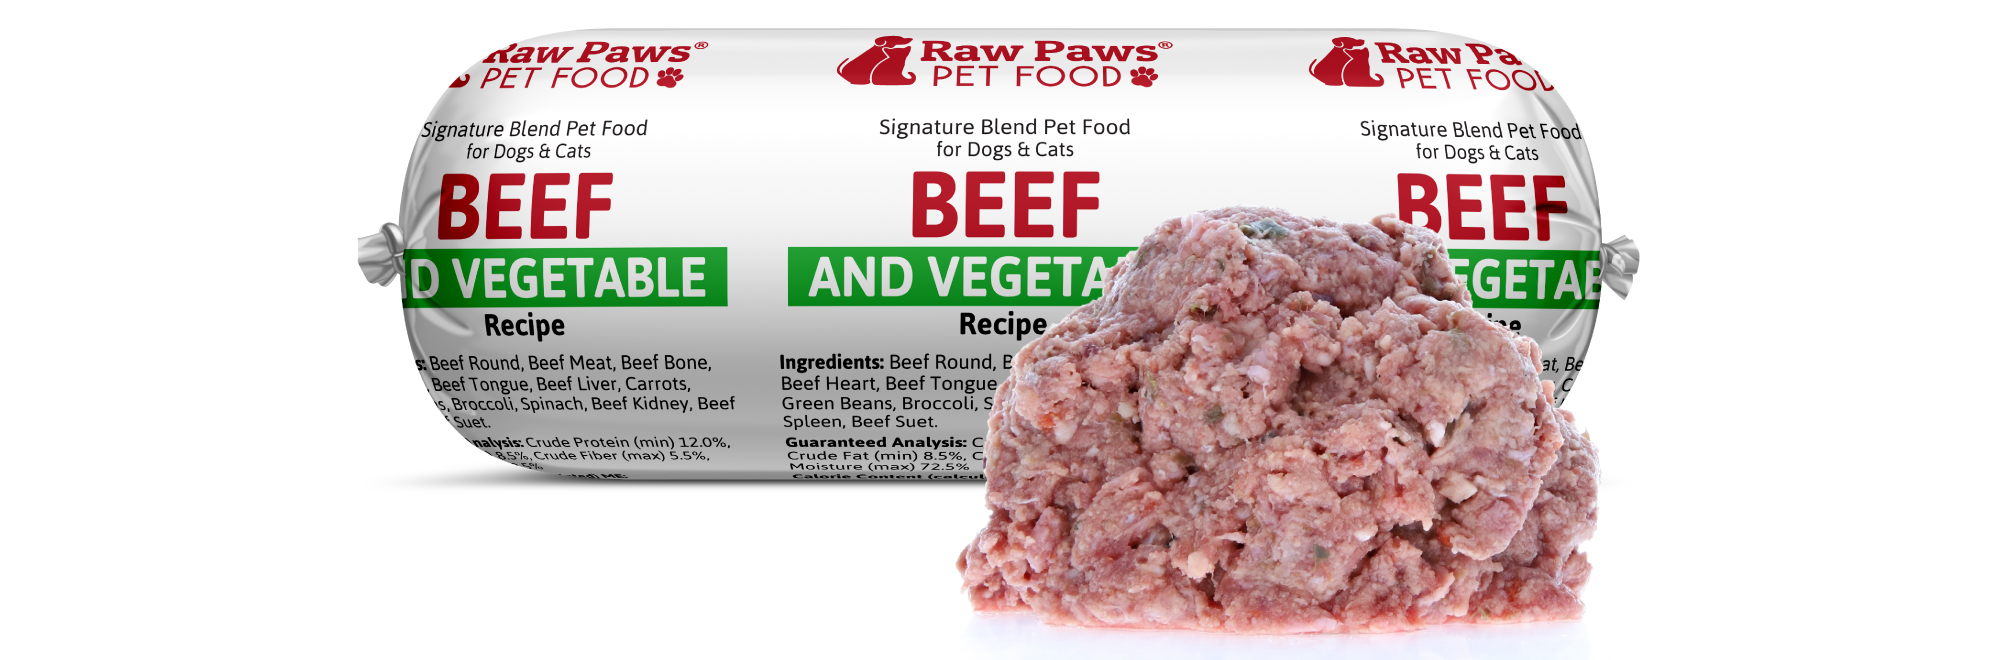 Raw Paws Signature Blend Complete Beef & Vegetable for Dogs & Cats, 1 lb